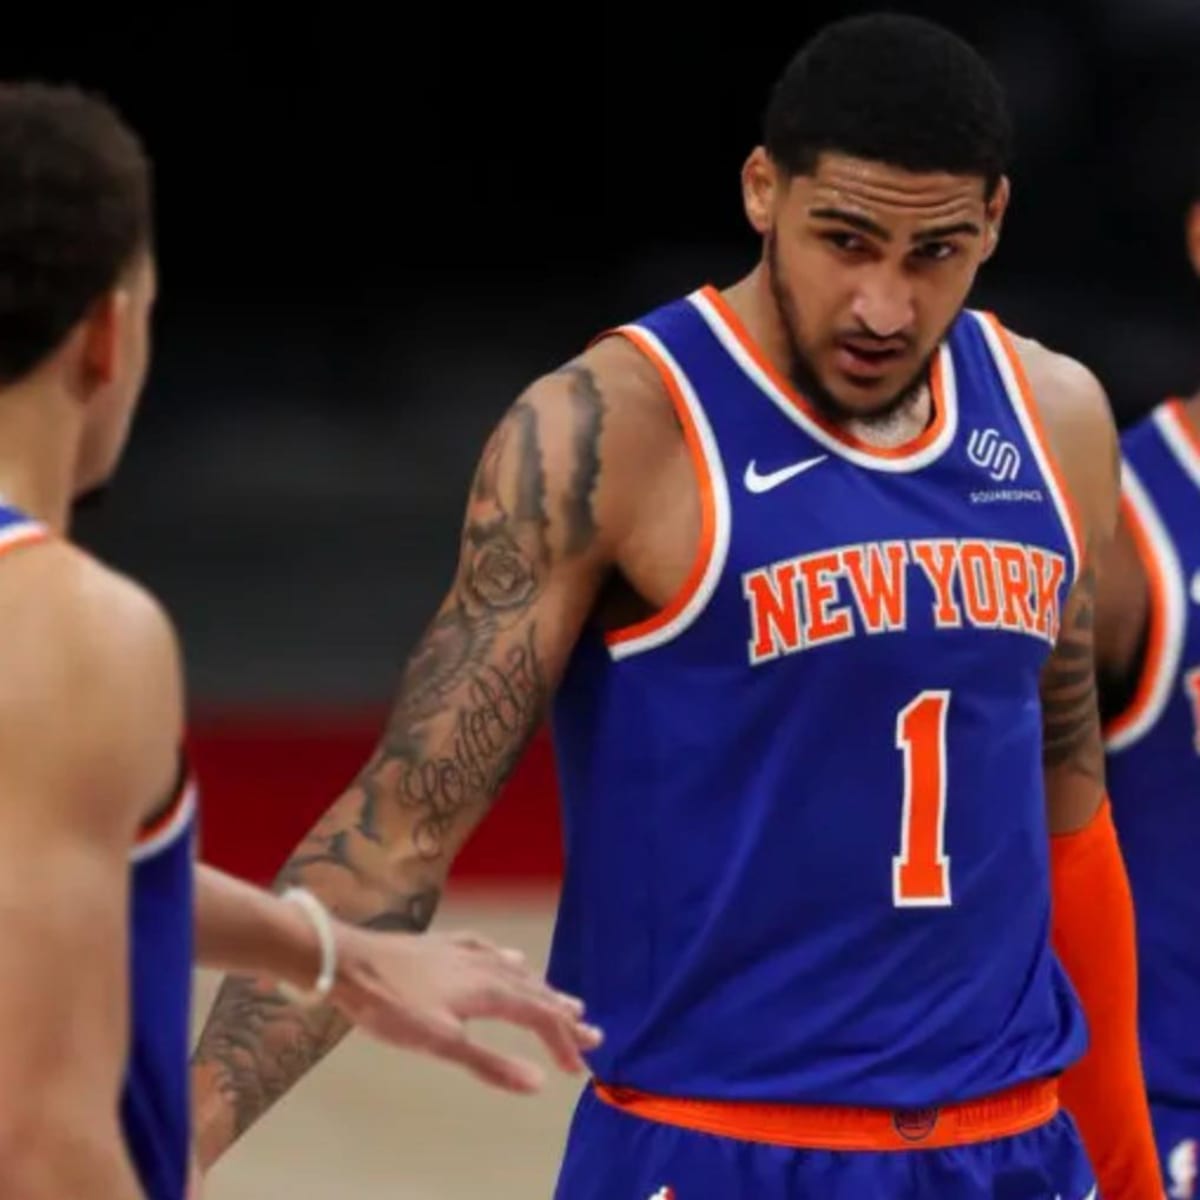 Watching Him Is Awesome': Obi Toppin's Father Talks Knicks & Dunks on 'MSG  PM' - Sports Illustrated New York Knicks News, Analysis and More